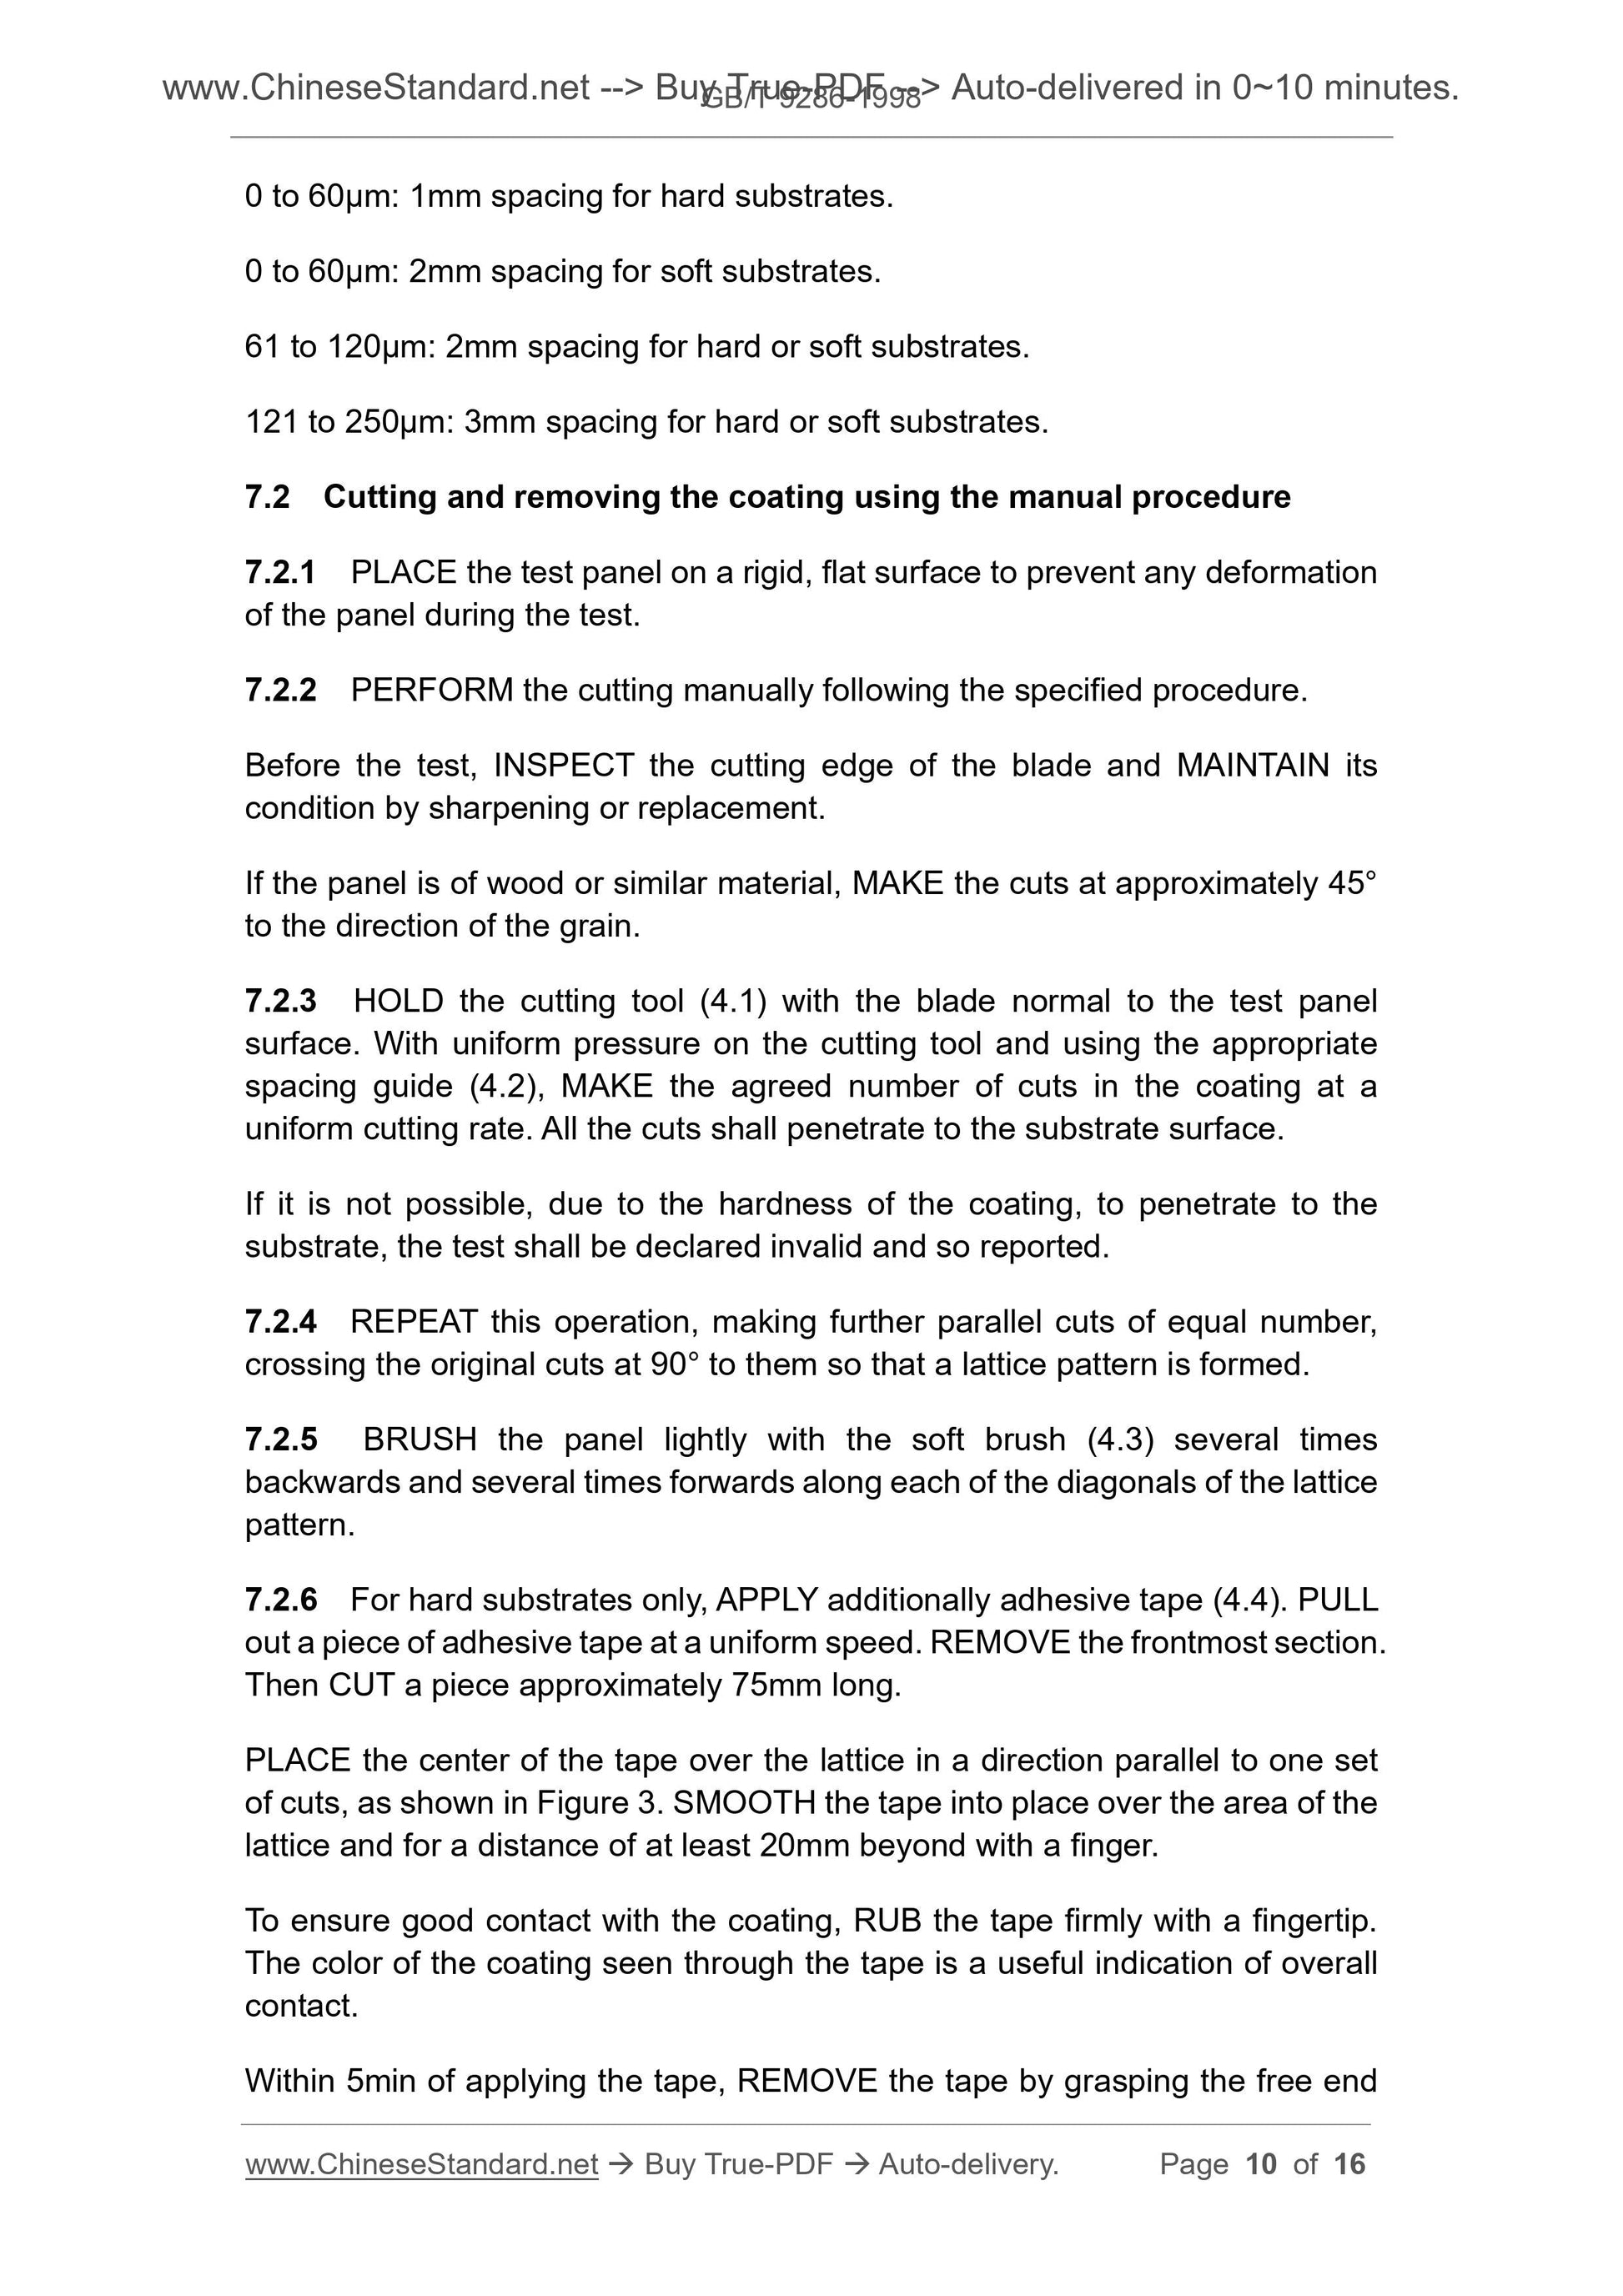 GB/T 9286-1998 Page 7